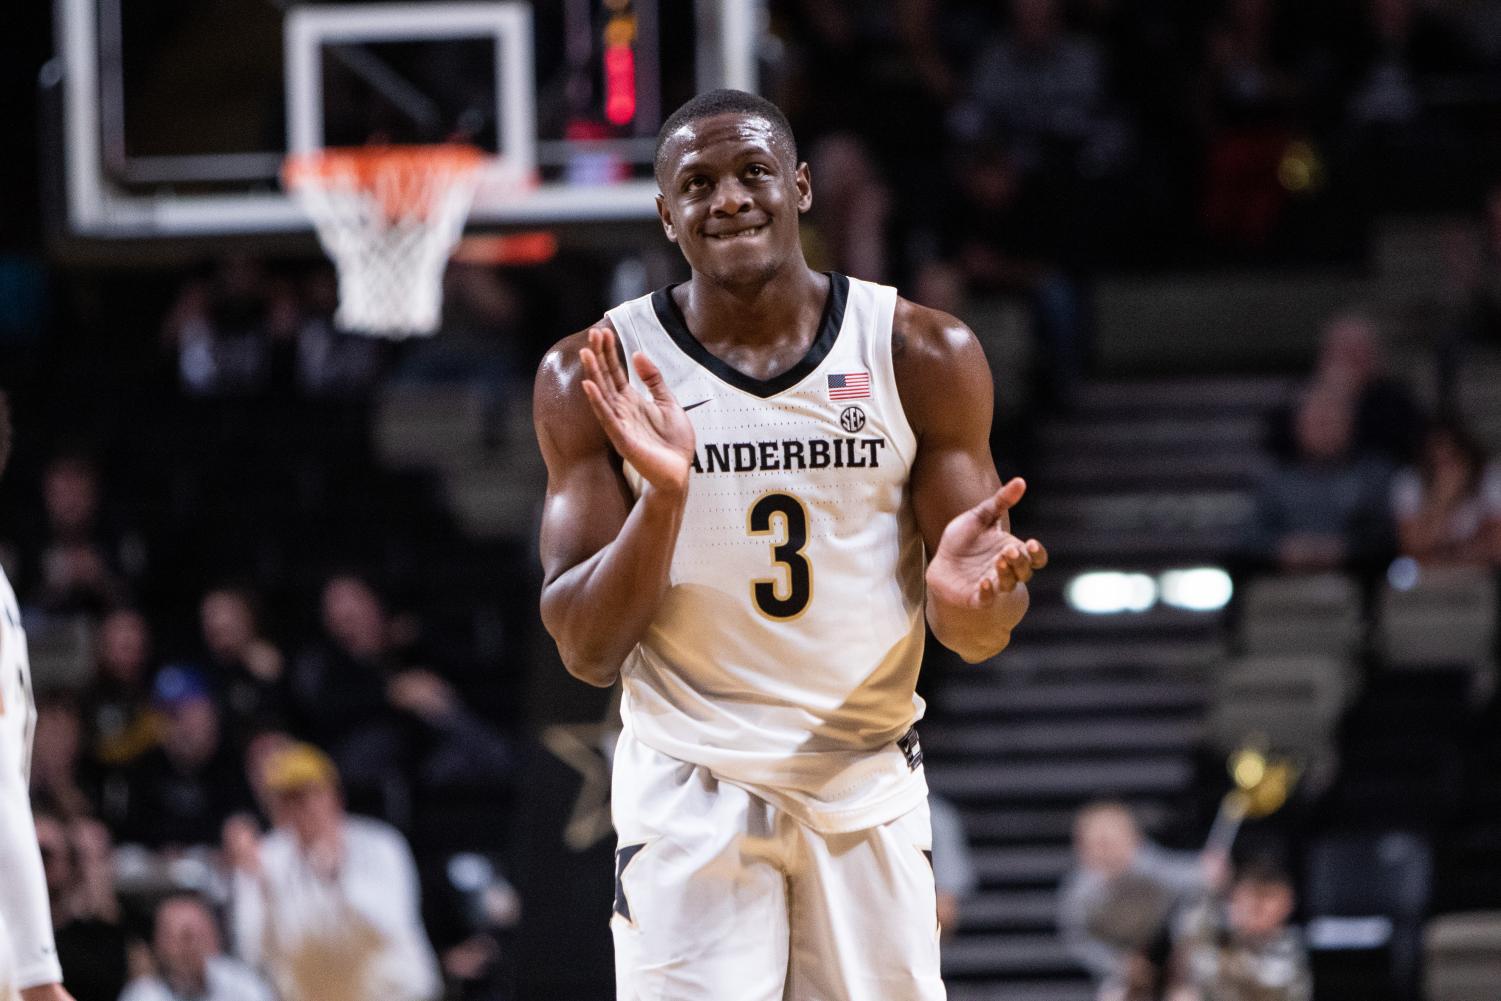 Vanderbilt defeated Southeast Missouri State on Wednesday night to win its first game of the season.